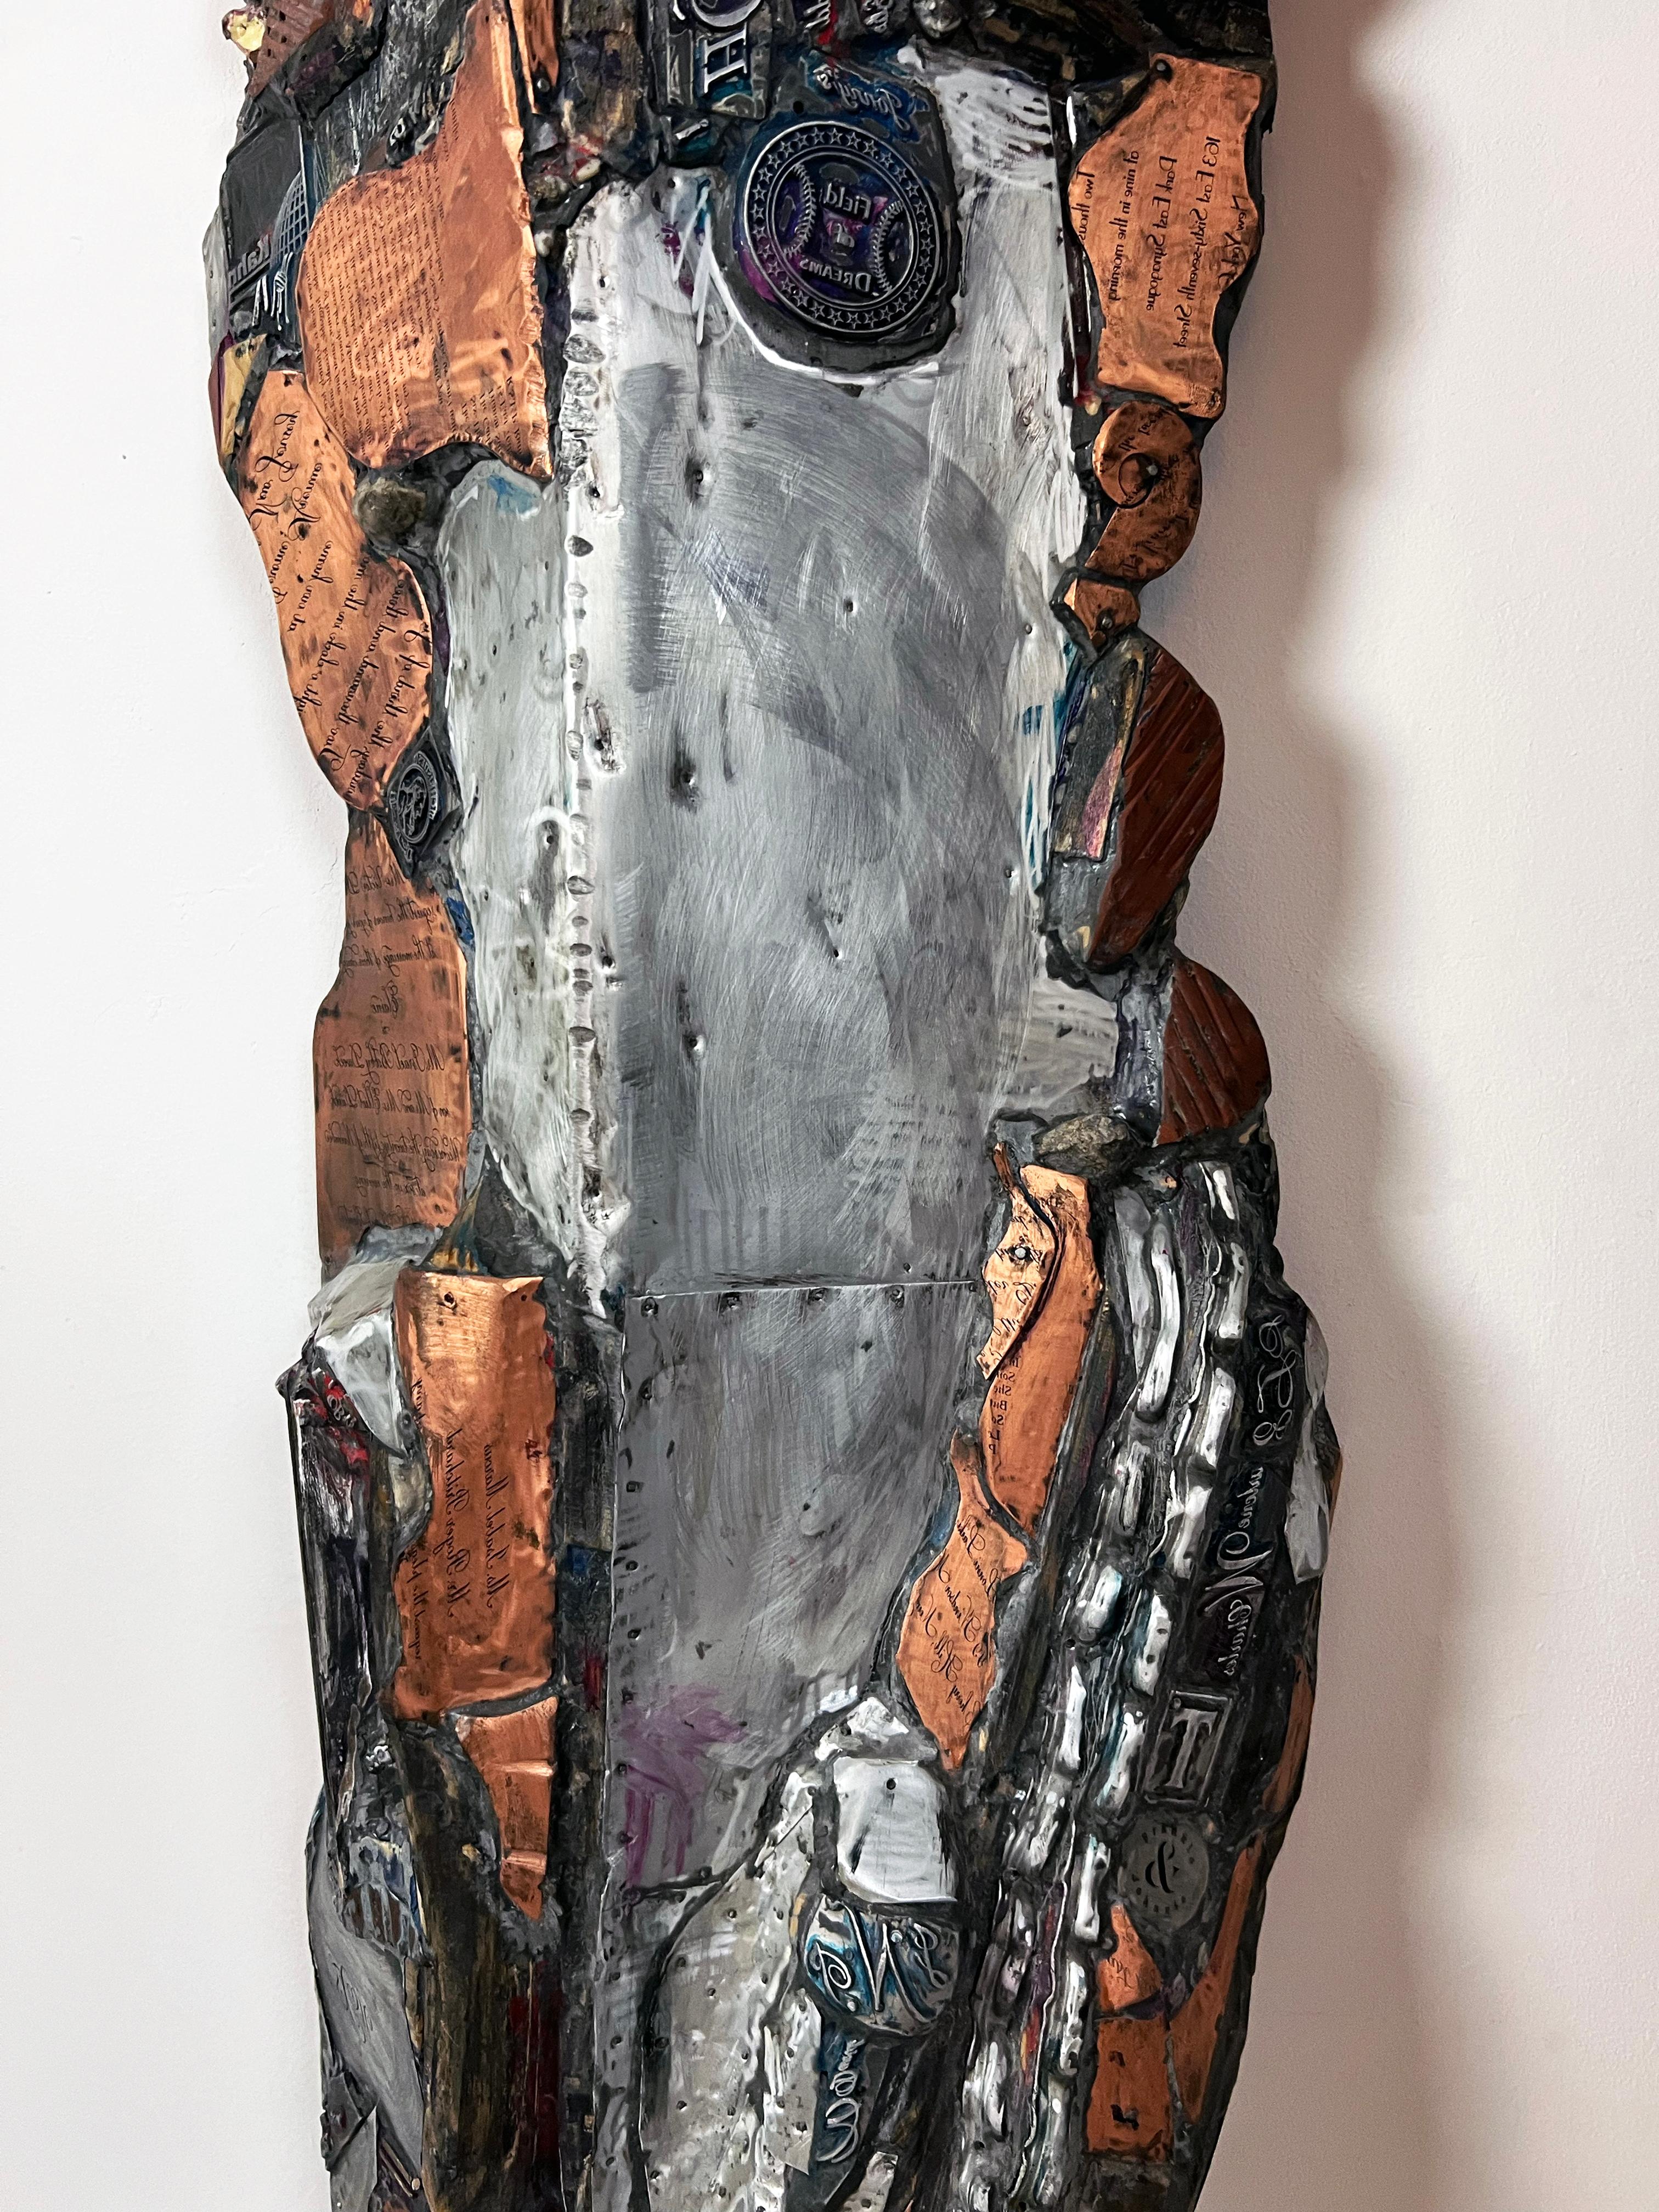 American Contemporary Mixed Media Sculpture - Linda Stein, Knight of Dreams 531 For Sale 5